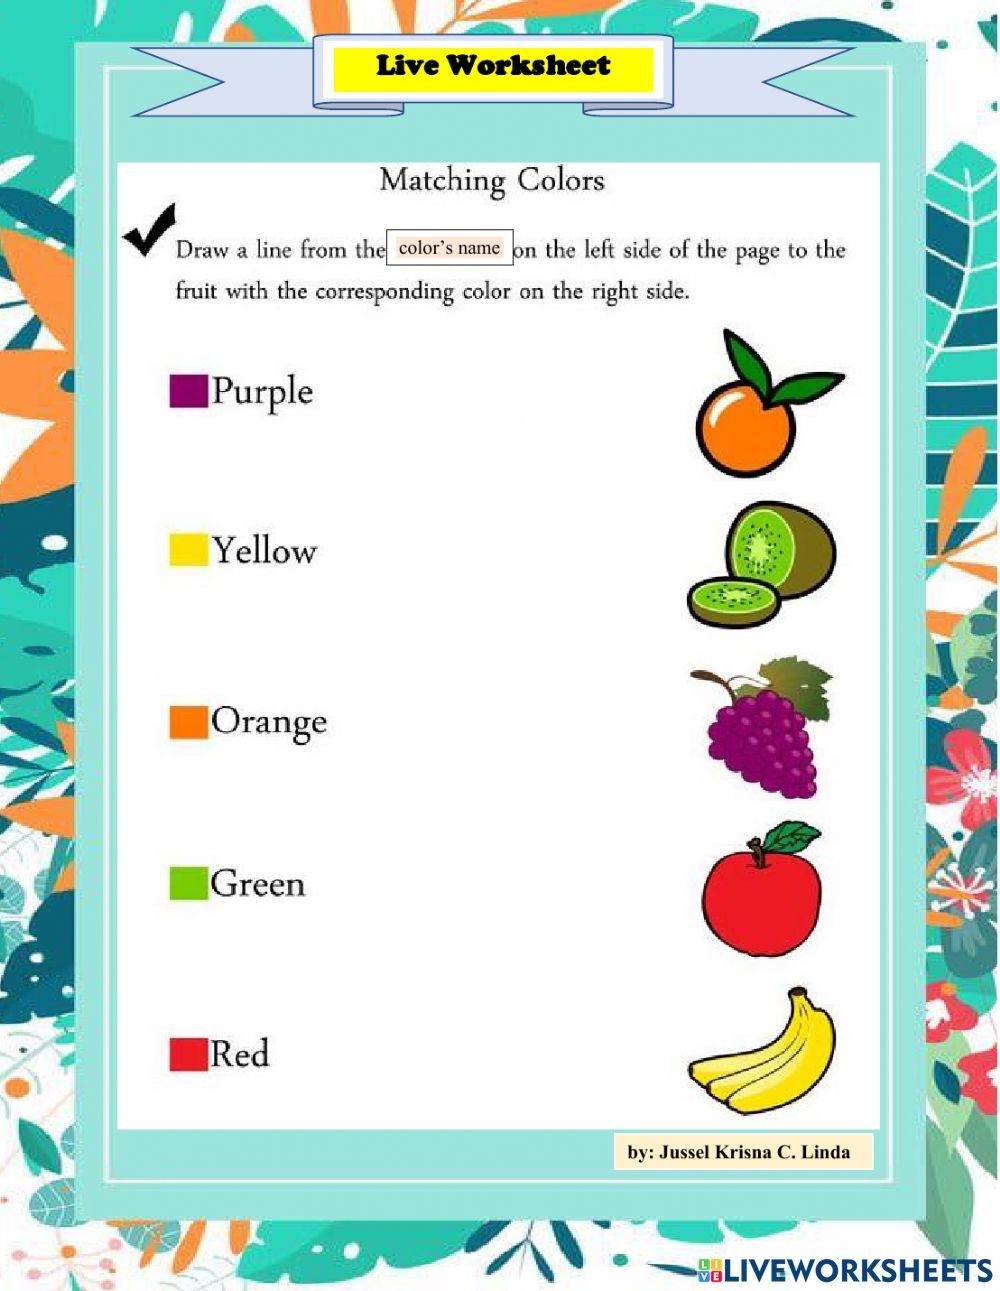 Matching fruits to the same color, by: Jussel Krisna C. Linda